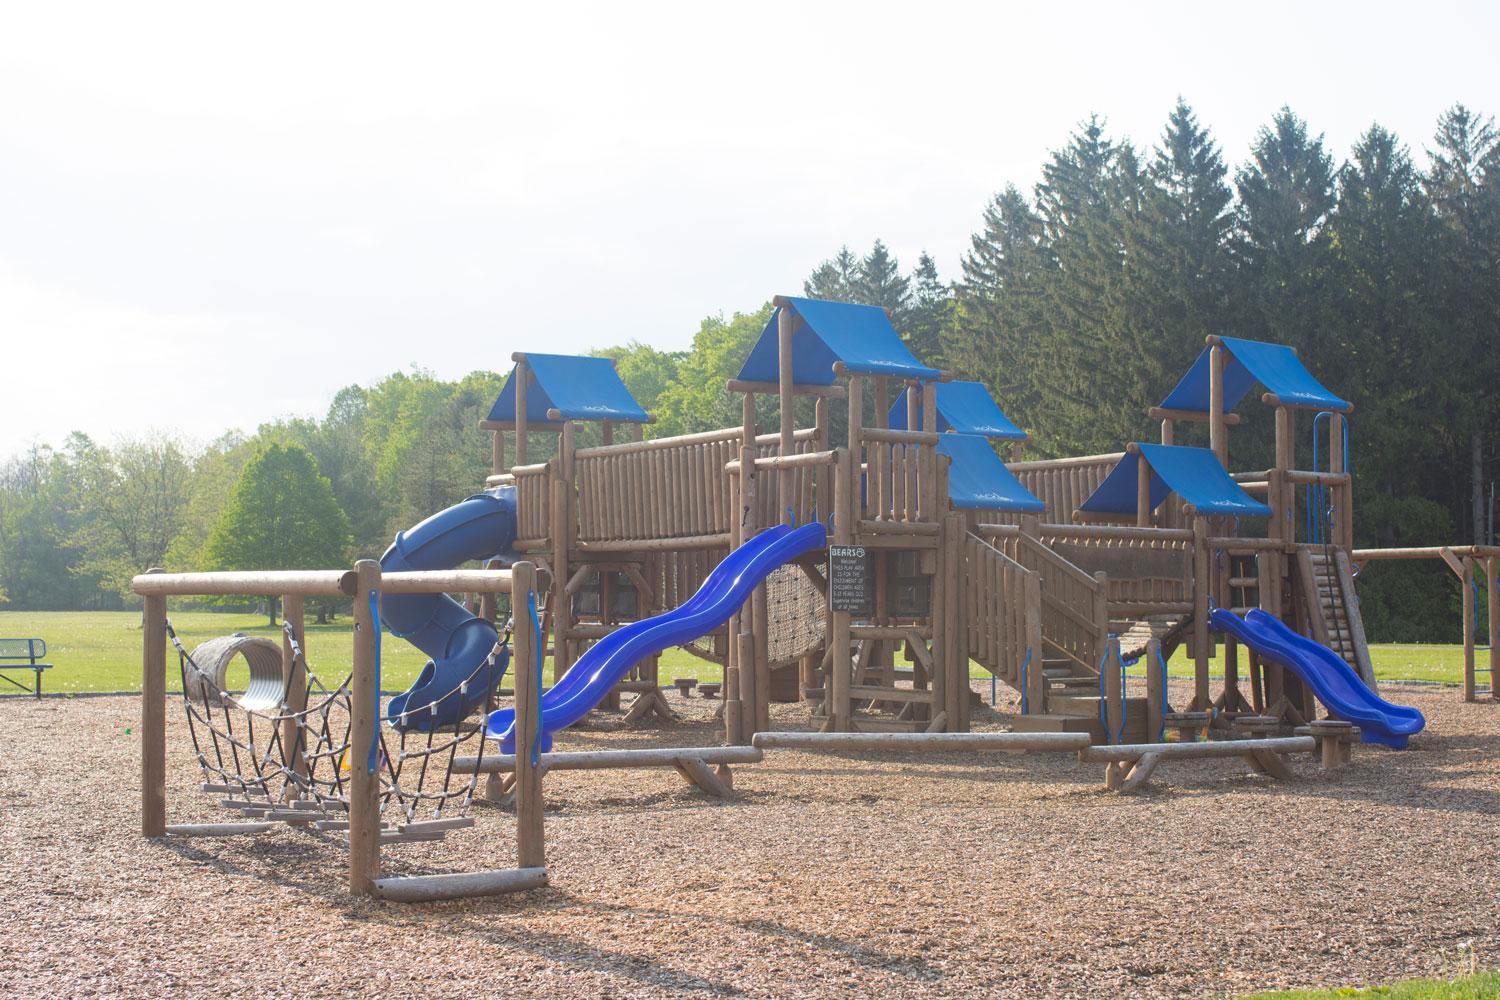 Playground: Large wooden playground with blue canopies and slides